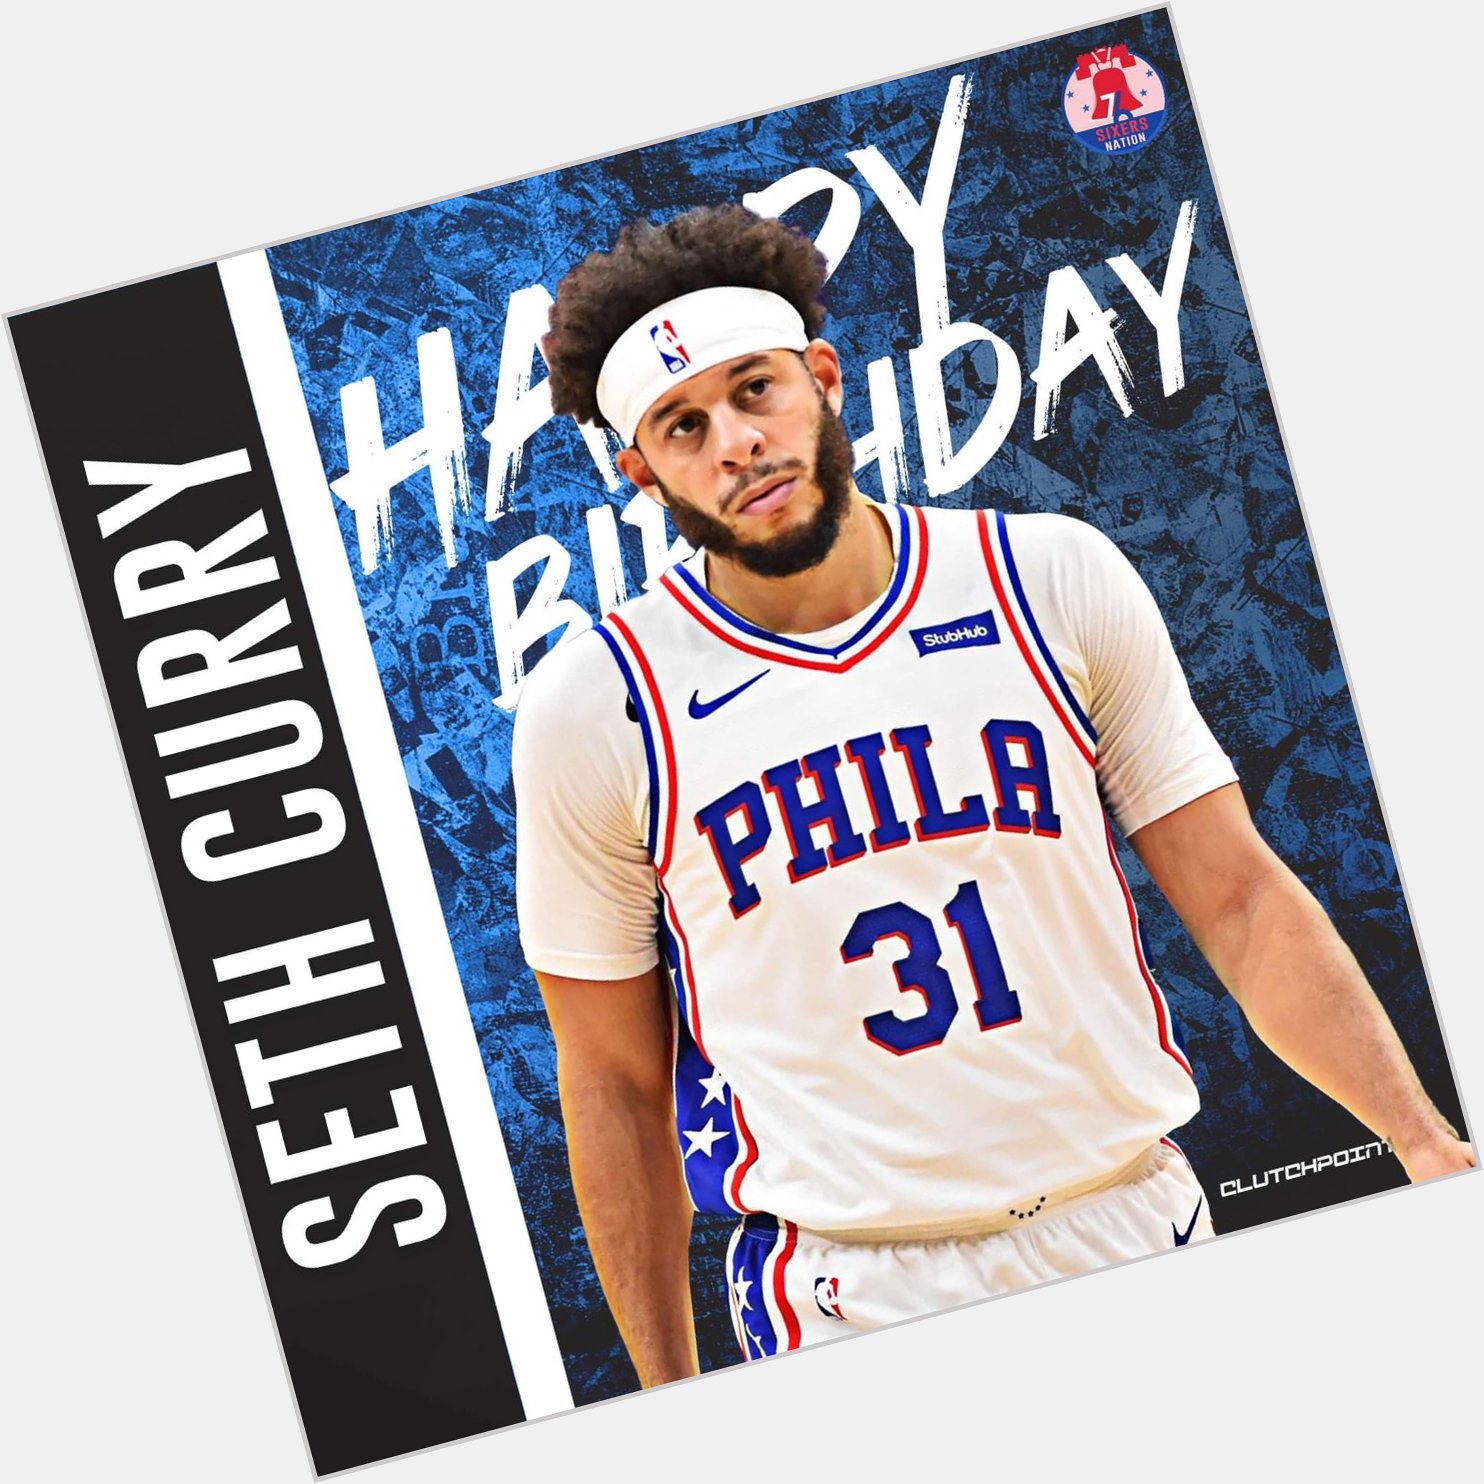 Join Sixers Nation in wishing Seth Curry a happy 31st birthday!  